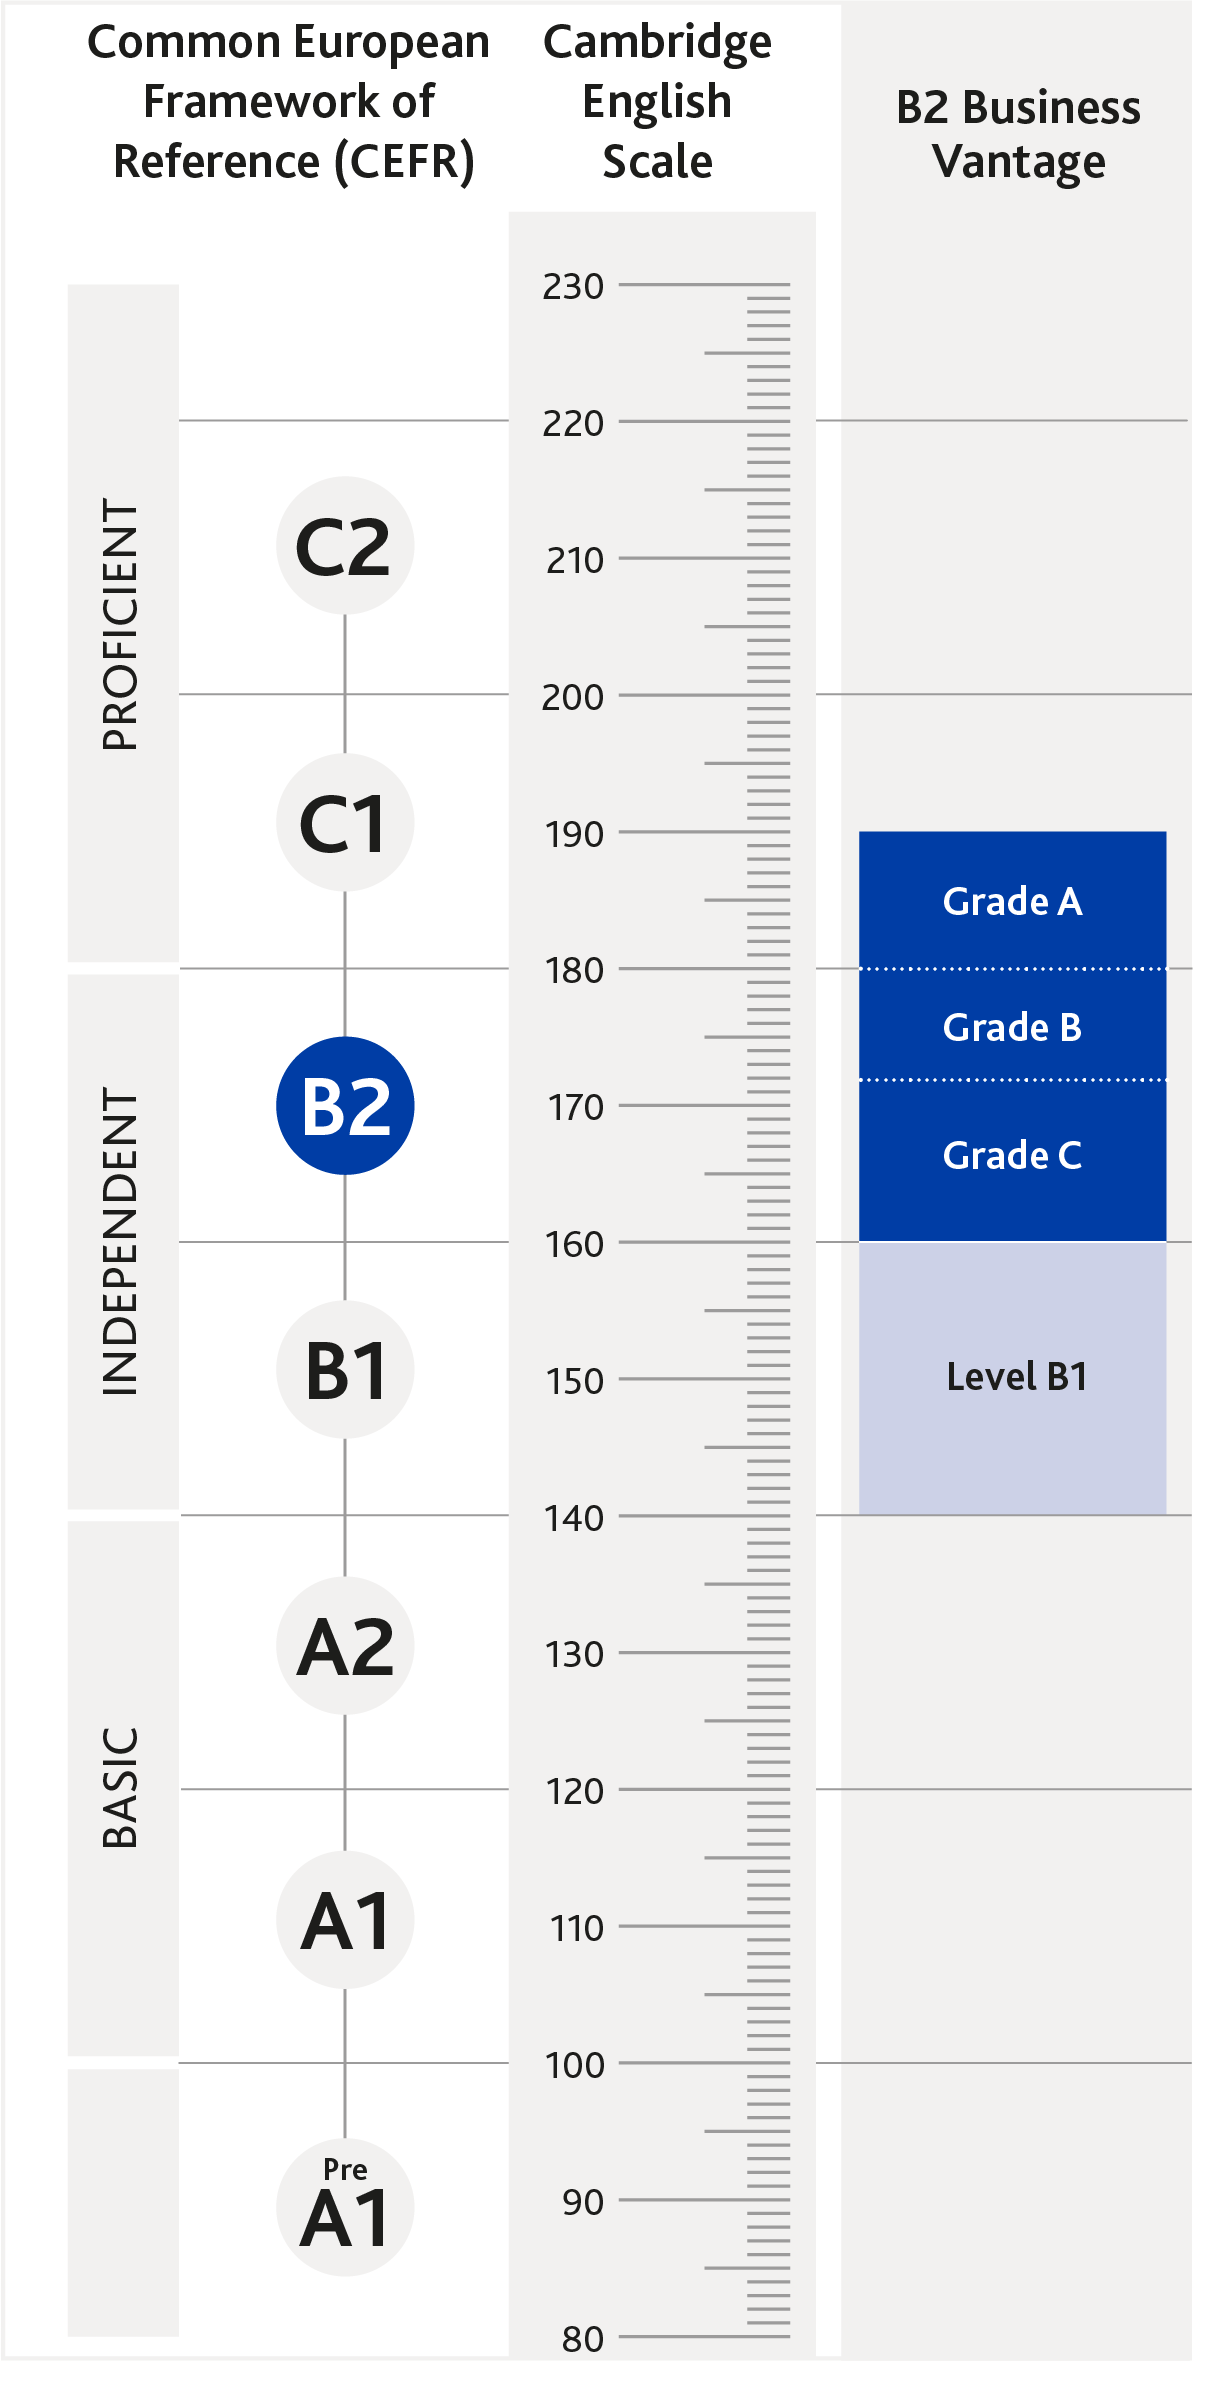 Diagram of where B2 Business Vantage is aligned on the CEFR and the Cambridge English Scale